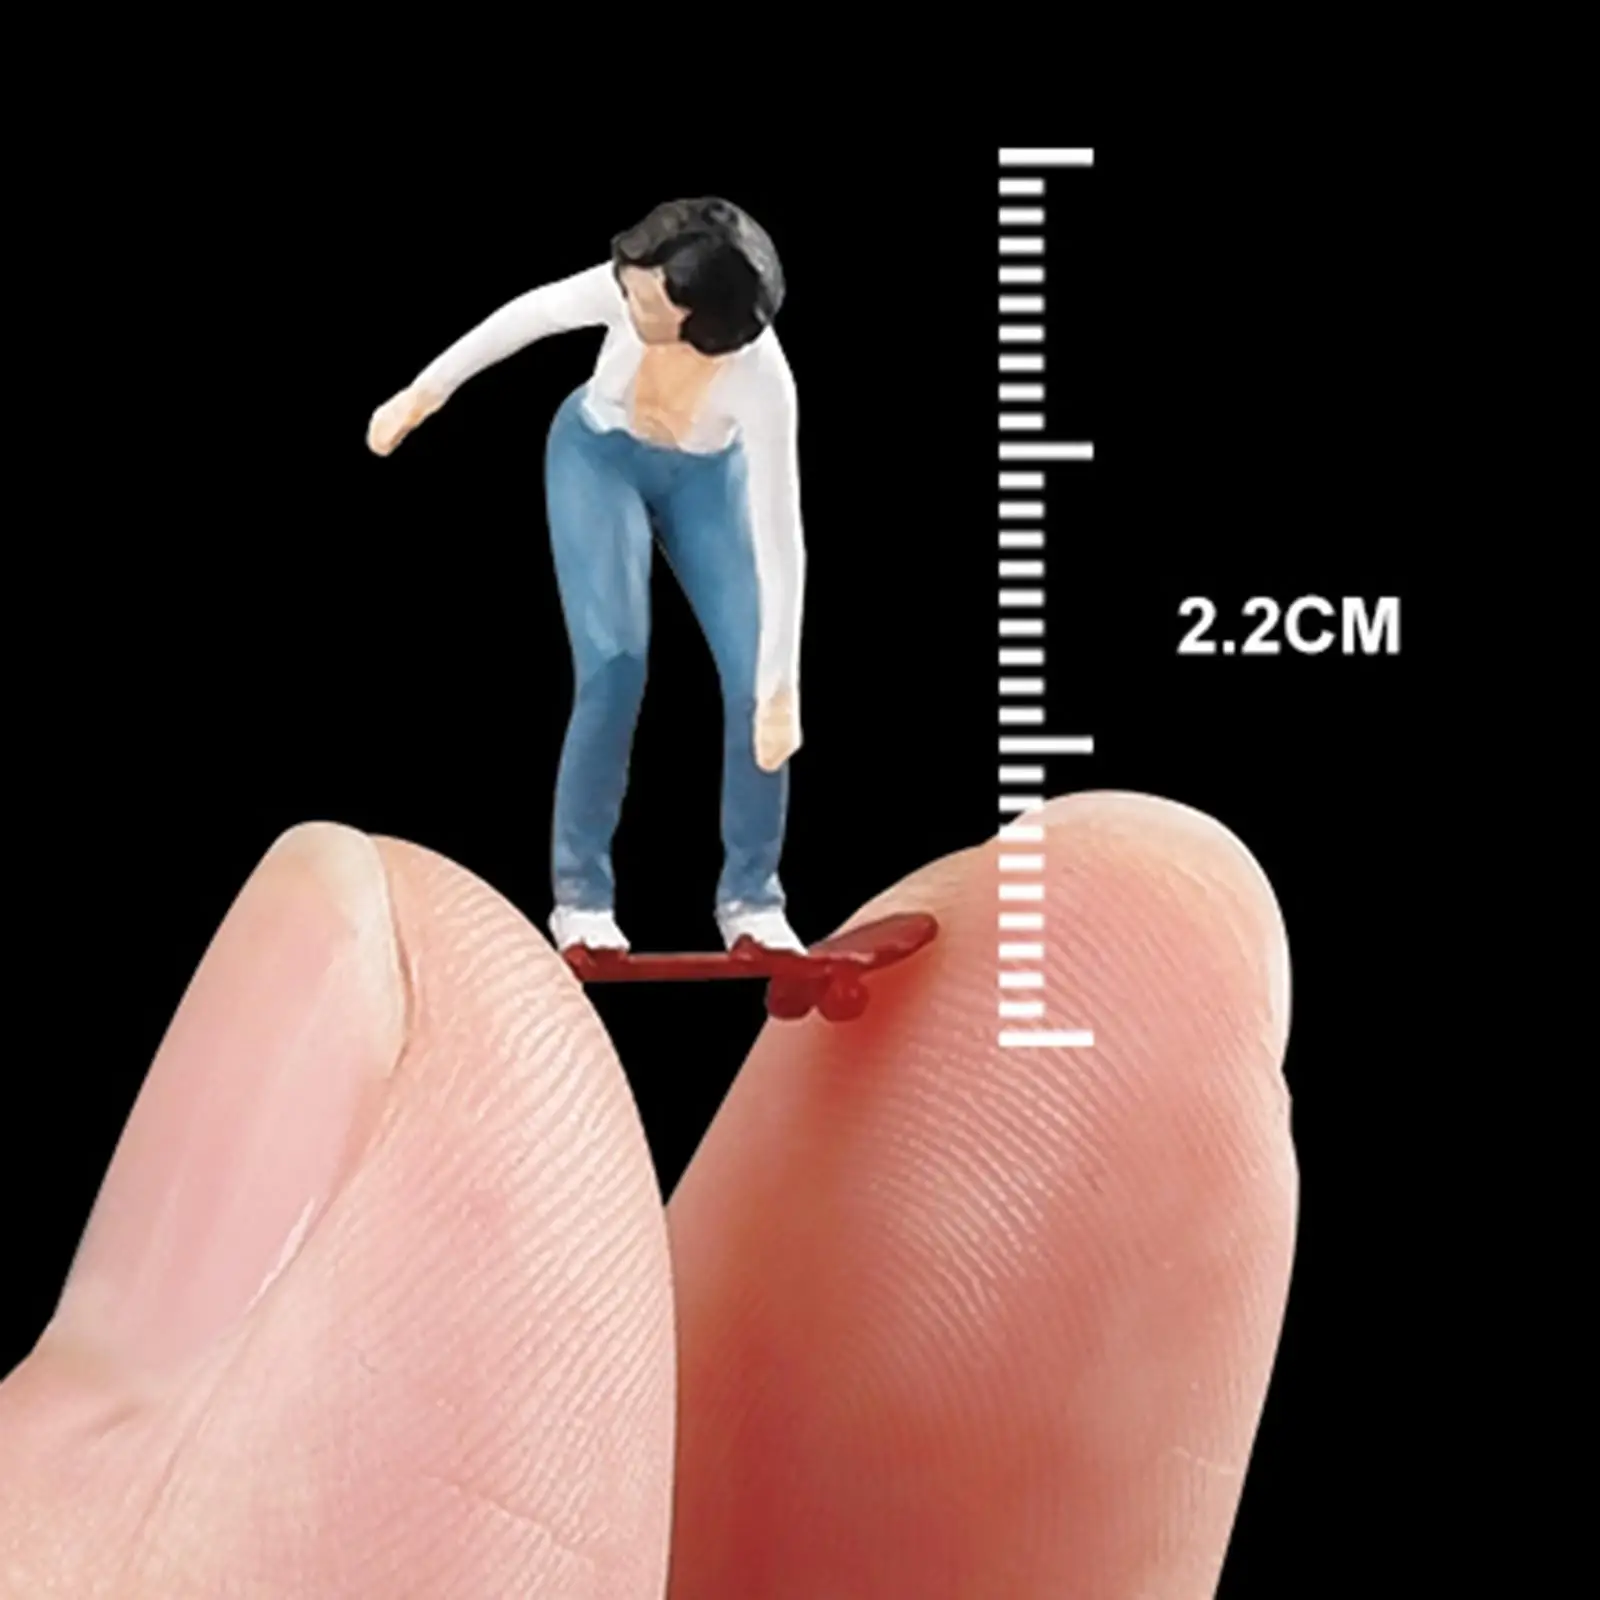 1/64 Scale Miniature Figure Painted Doll Toy Skateboard Women for Dollhouse Accessories DIY Projects Model Building Kits Railway